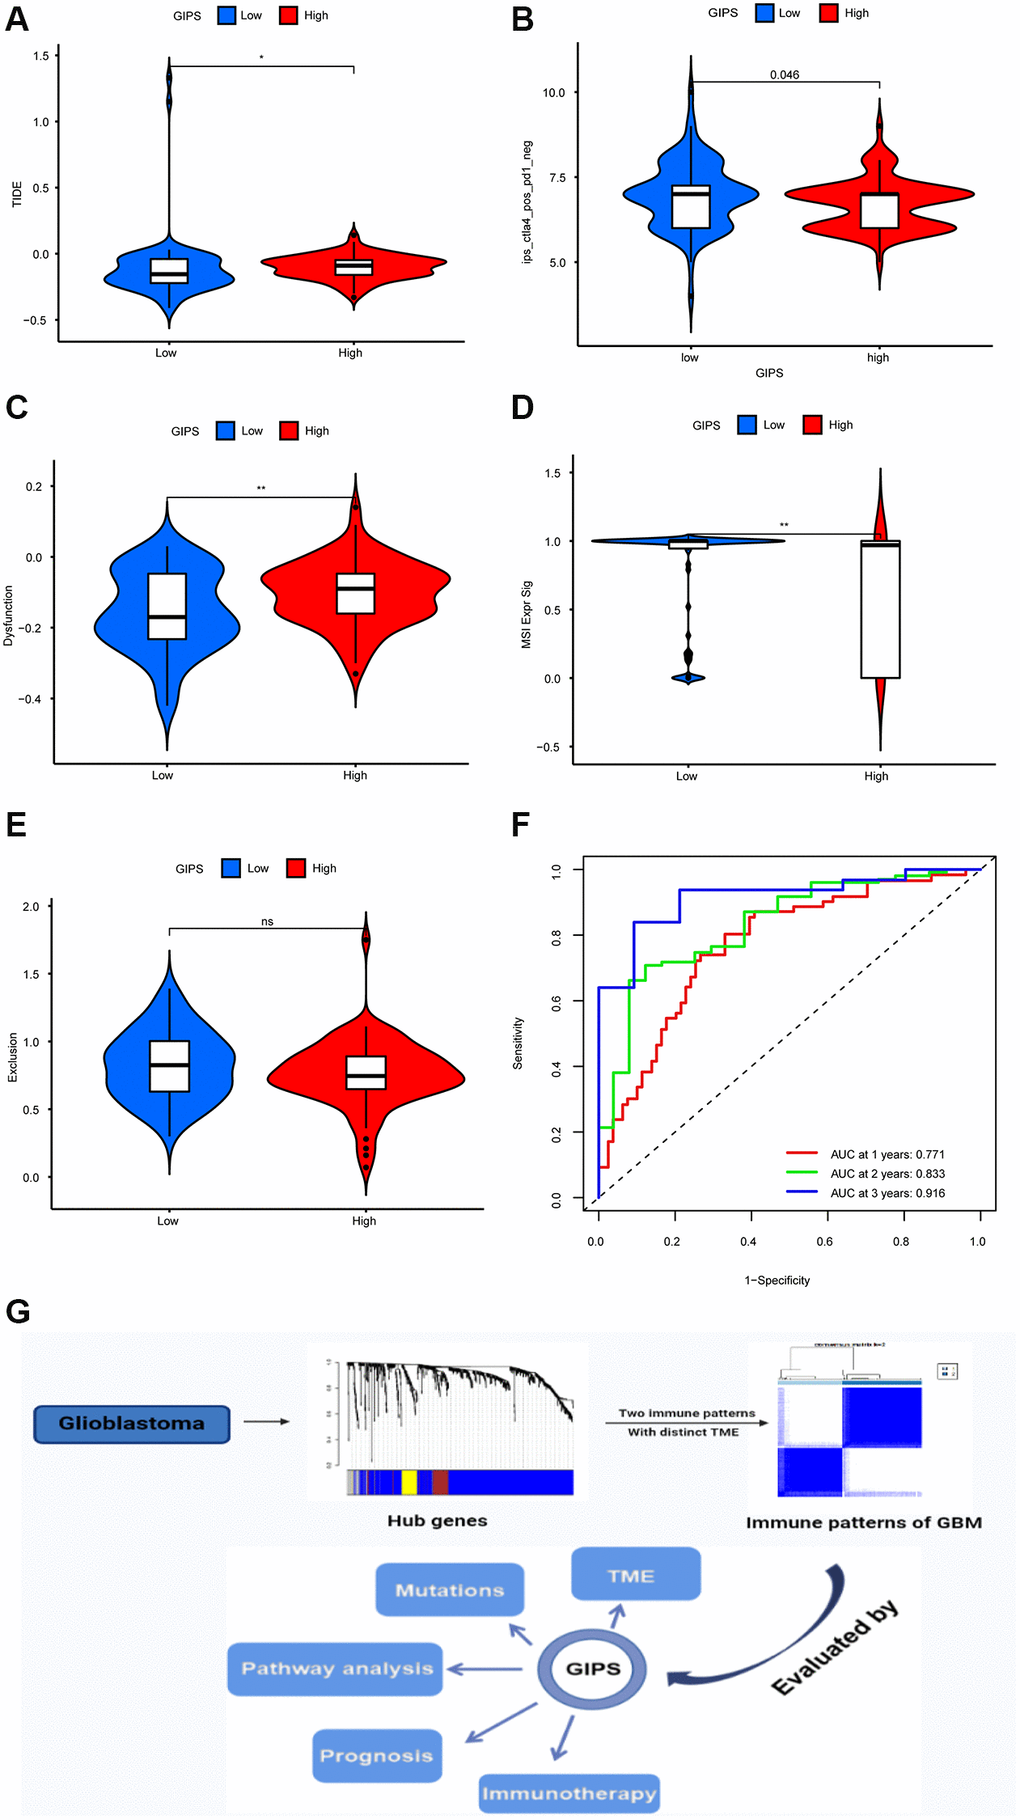 Immunotherapy response in different GIPS subgroups. (A) Differential analysis of TIDE score between GIPS subgroups. (B) Effectiveness of immunotherapy in GIPS subgroups. (C) Differential analysis of dysfunction score between GIPS subgroups. (D) Differential analysis of MSI score between GIPS subgroups. (E) Differential analysis of T-cell exclusion score between GIPS subgroups. (F) ROC curves of GIPS for predicting 1-, 2-, and 3-year survival in TCGA GBM cohorts. (G) Graphical summary of this study.